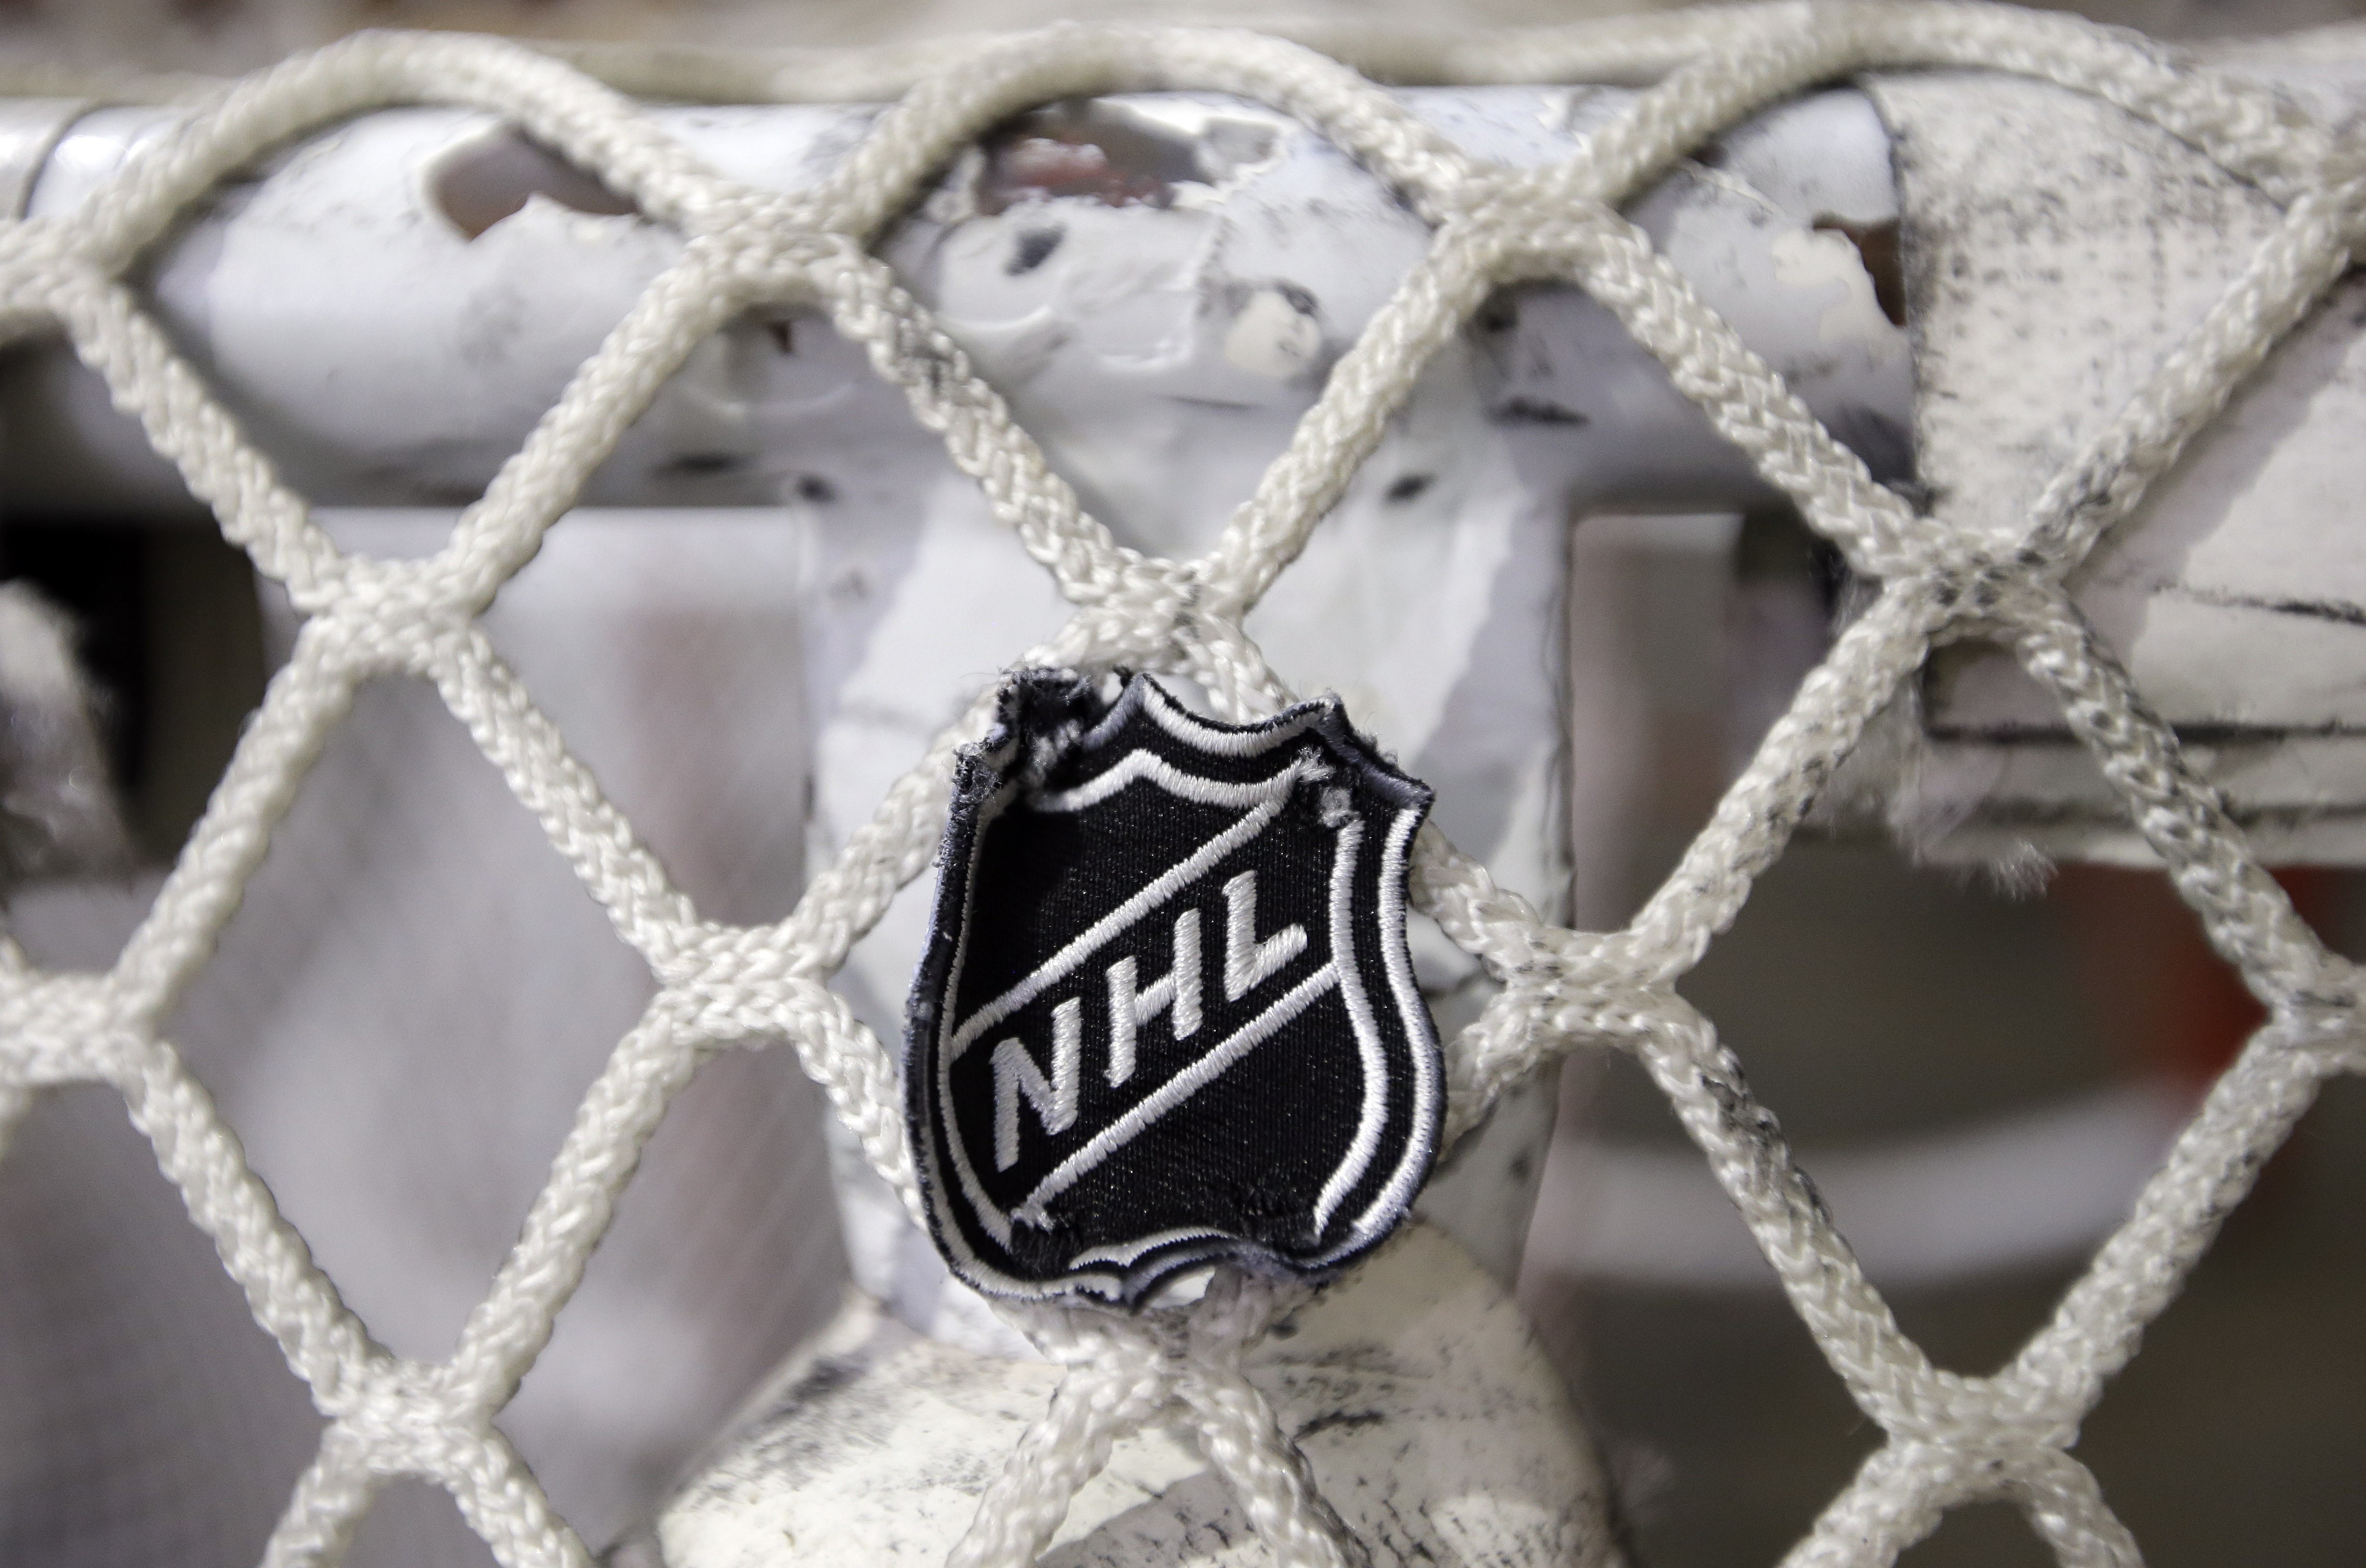 Fanatics to replace Adidas as NHL's jersey provider